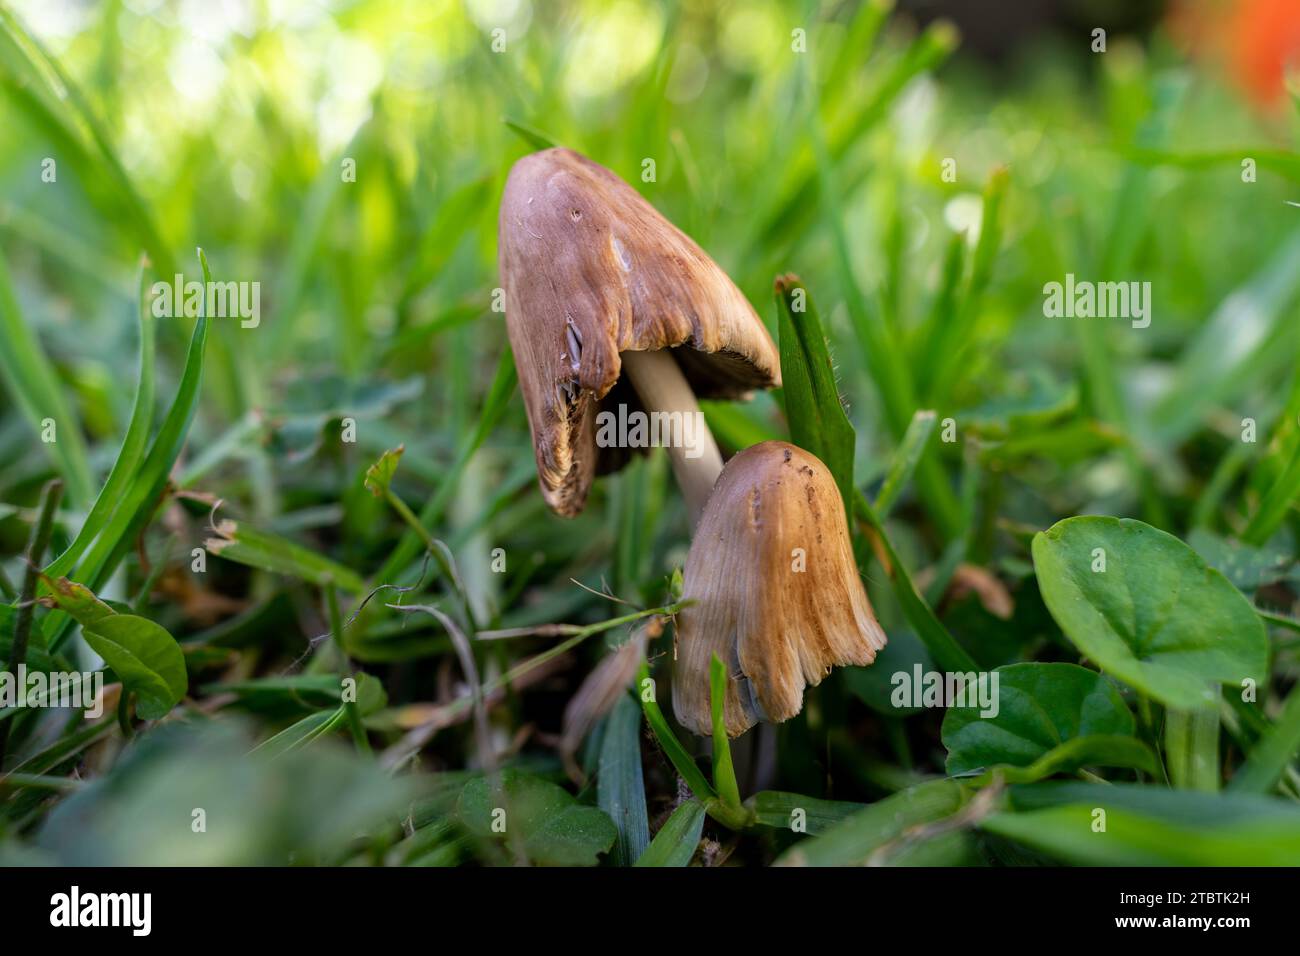 brown mushrooms surrounded by green grass Stock Photo